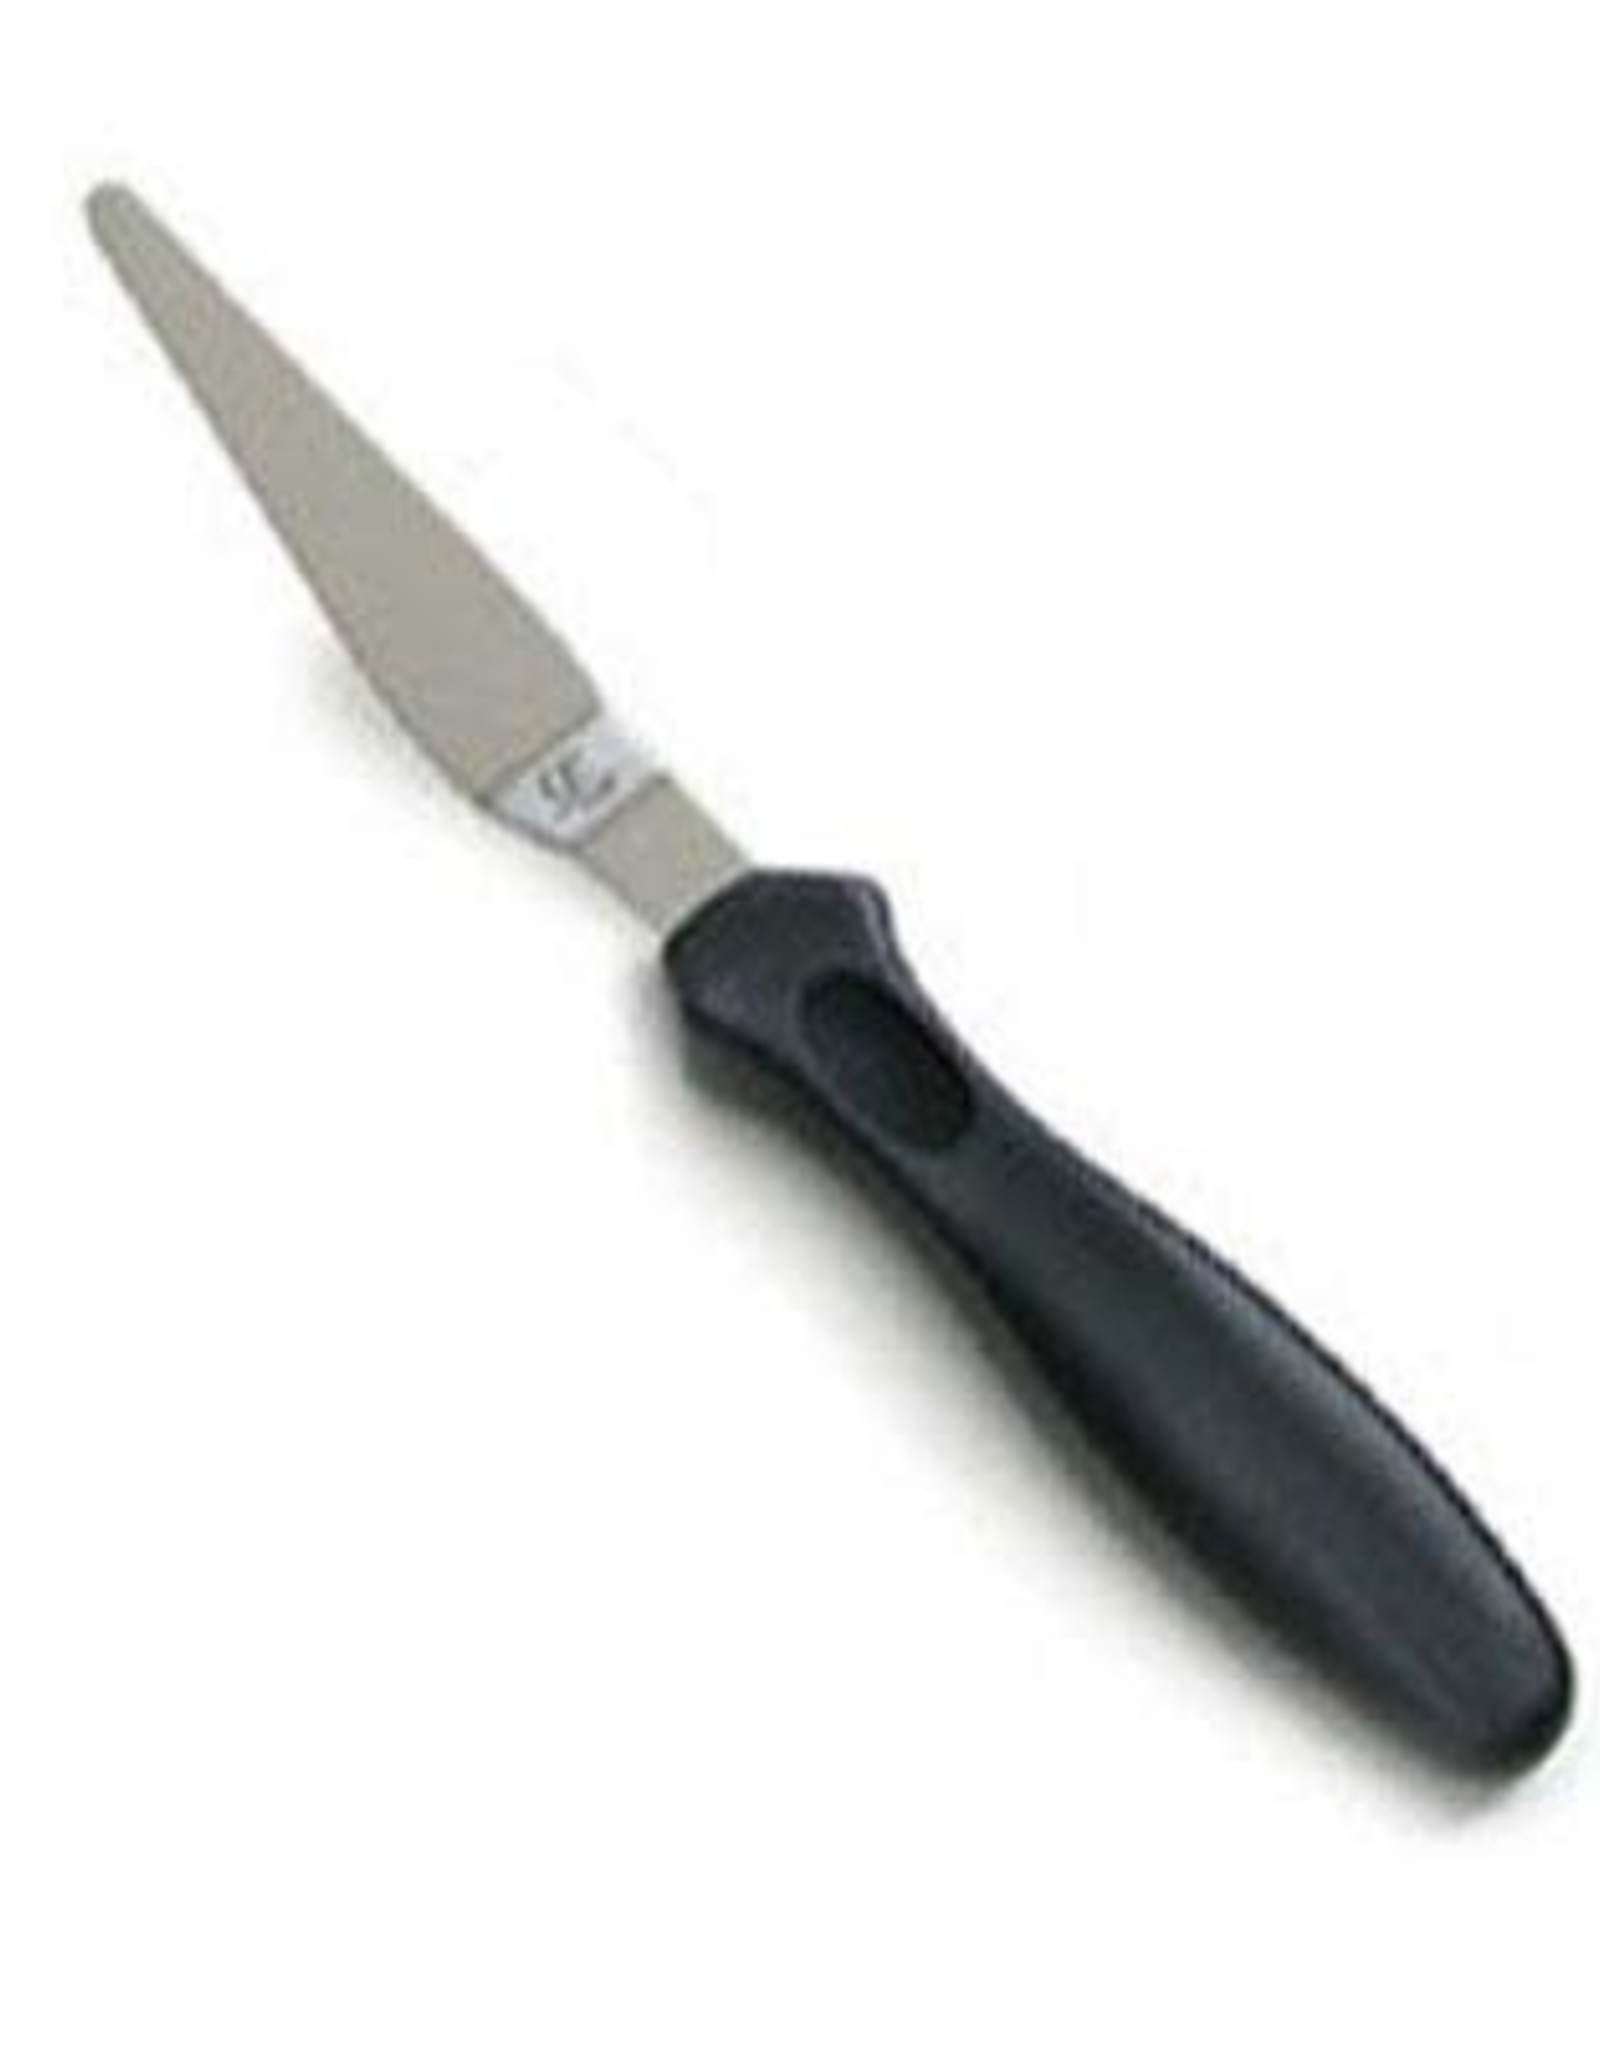 8" Tapered Spatula with Plastic Handle